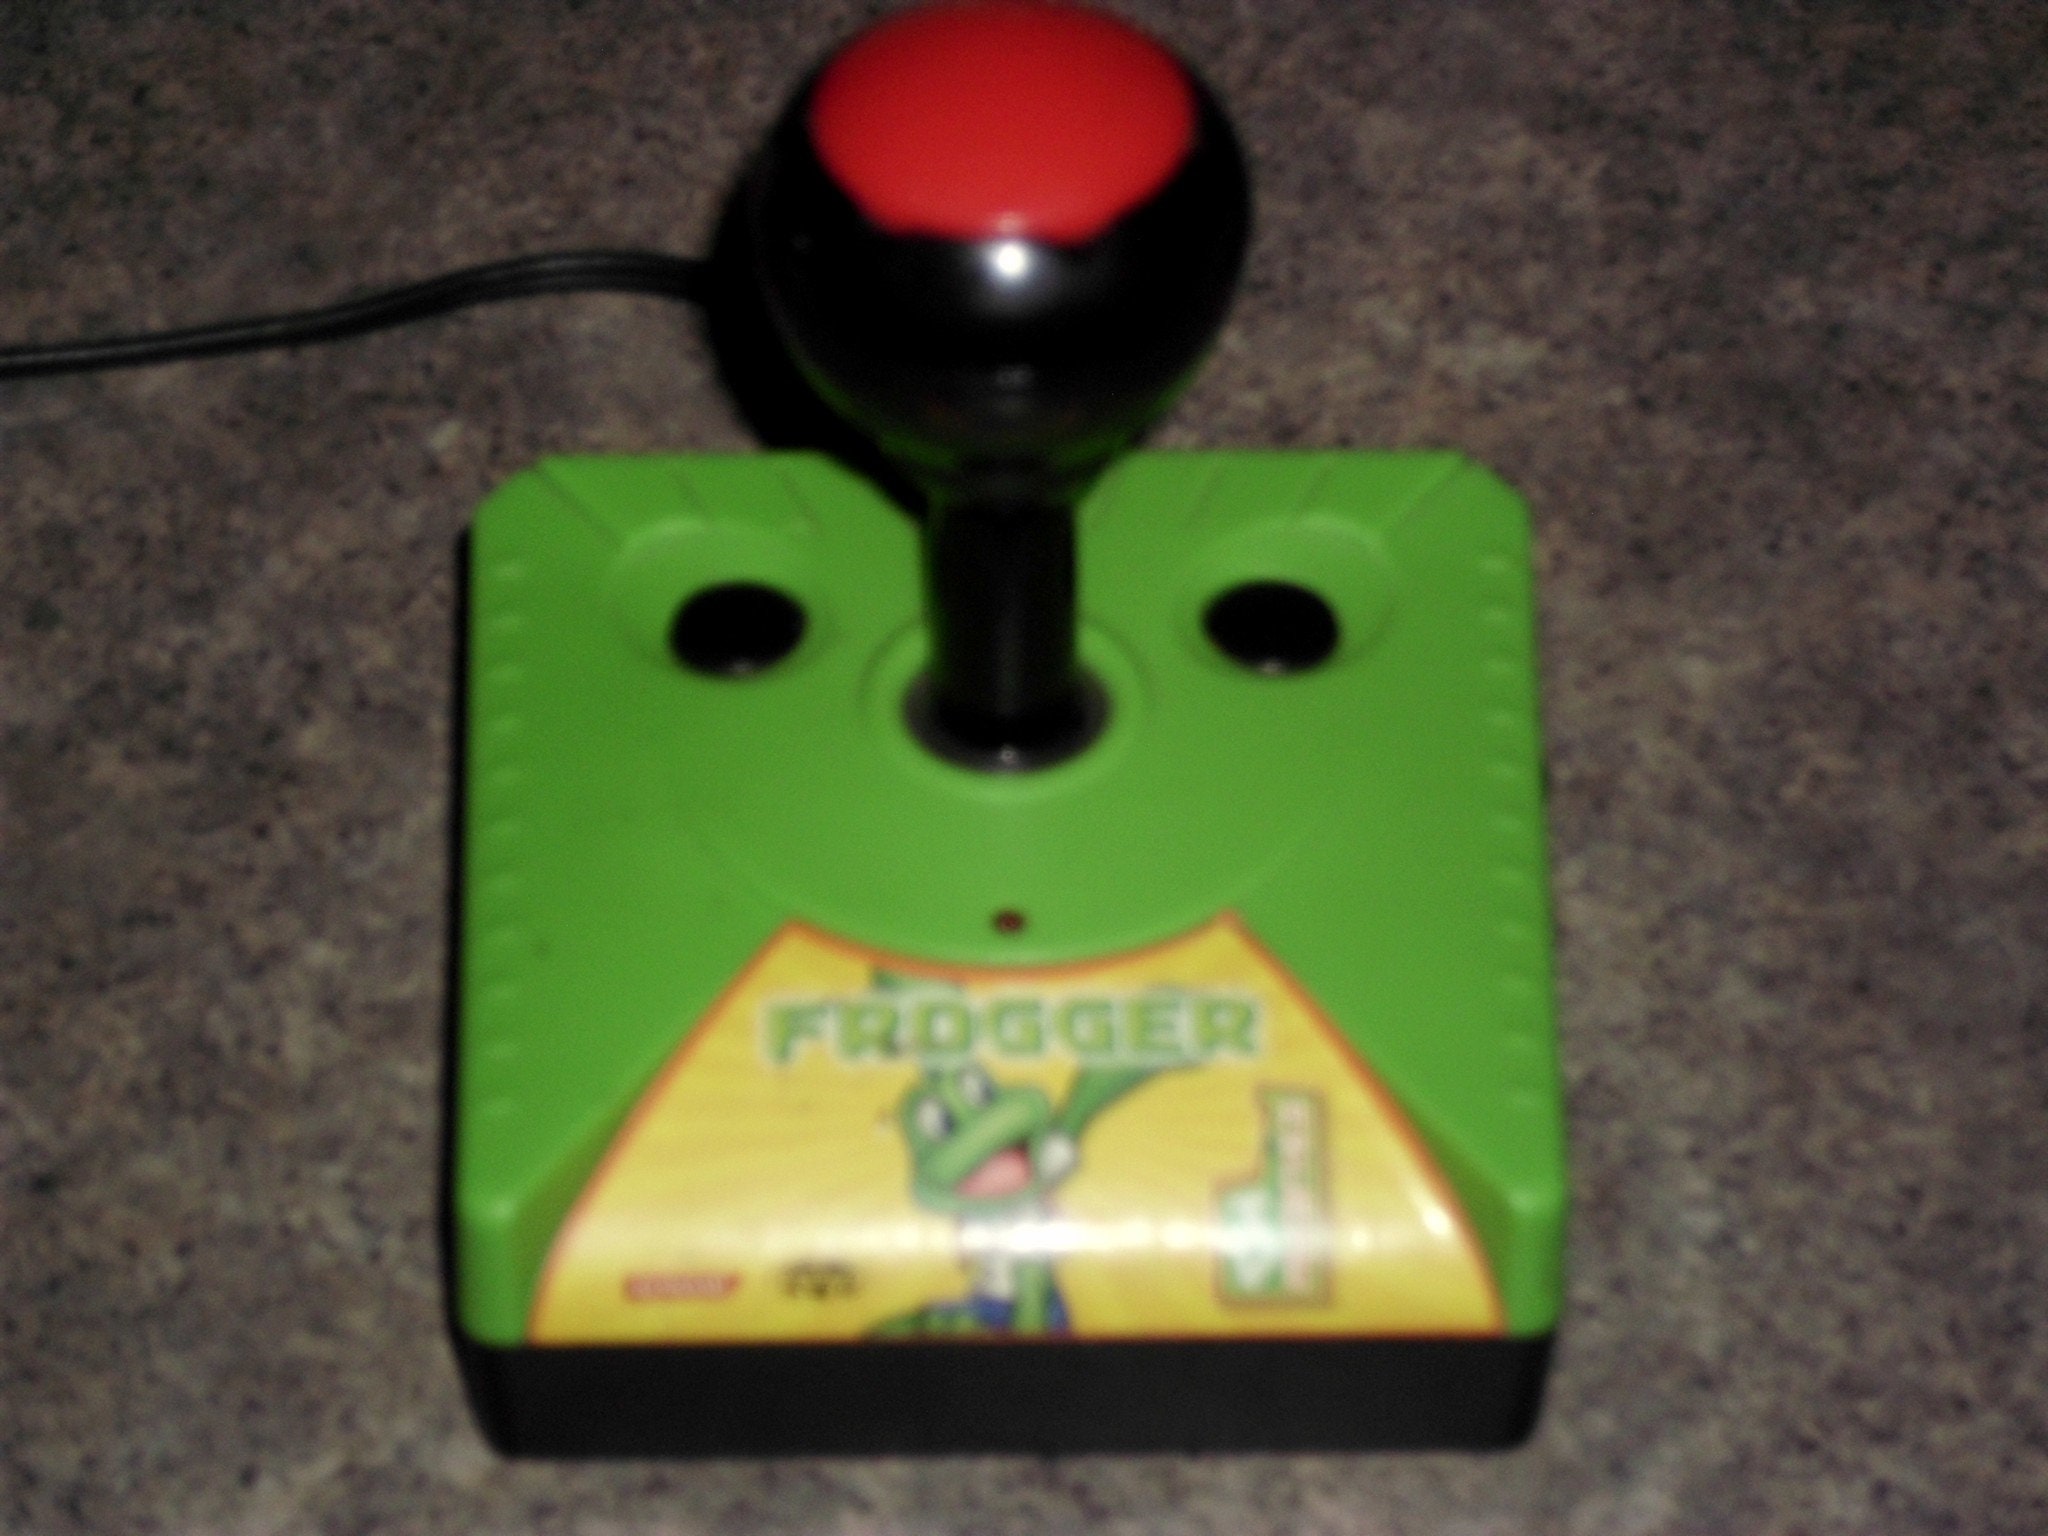  Frogger Plug It In and Play TV Arcade : Toys & Games